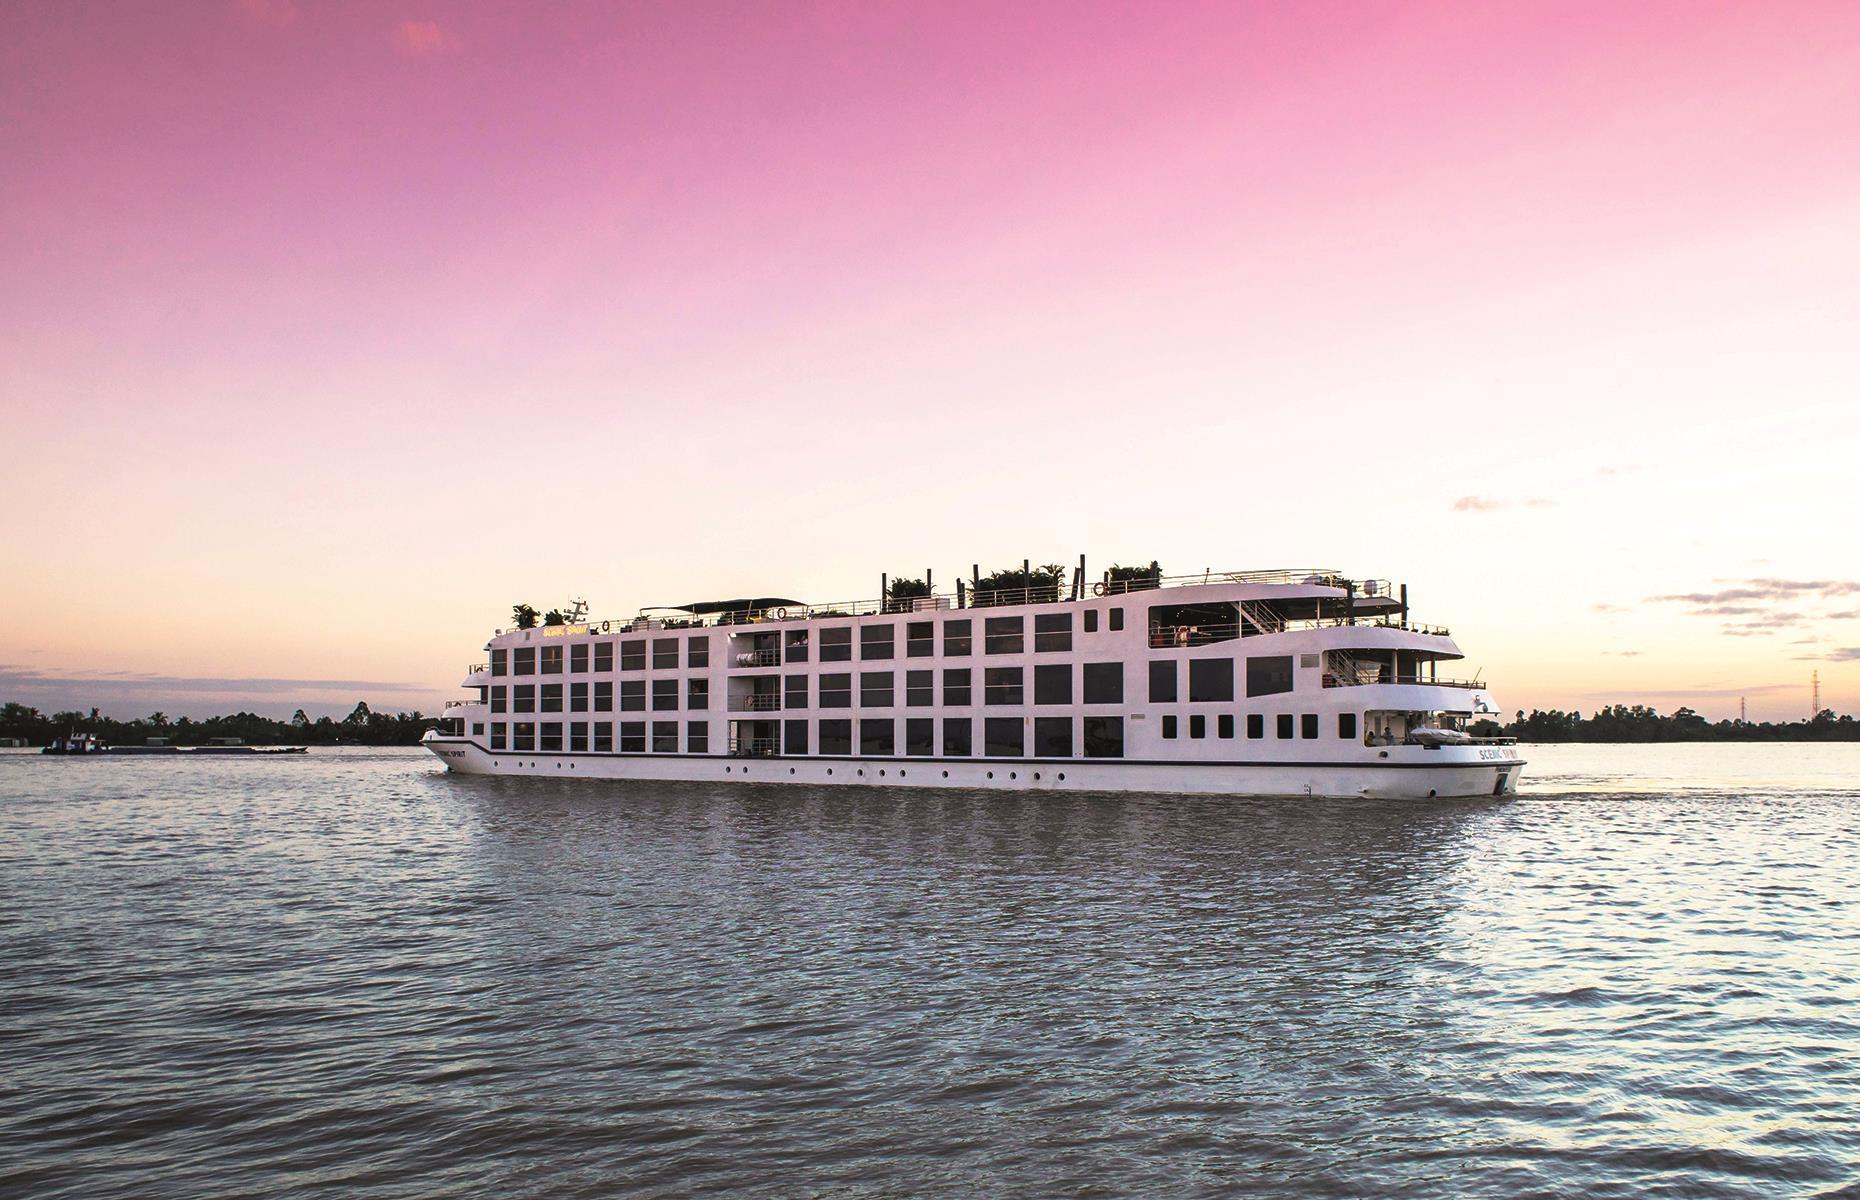 Whether you’re considering a river cruise for the first time or you’ve been navigating the world’s rivers for years, we’ve got 28 fabulous reasons to book a river cruise – from a leisurely float down the marvelous Mekong, to a cruise along the Hudson River.